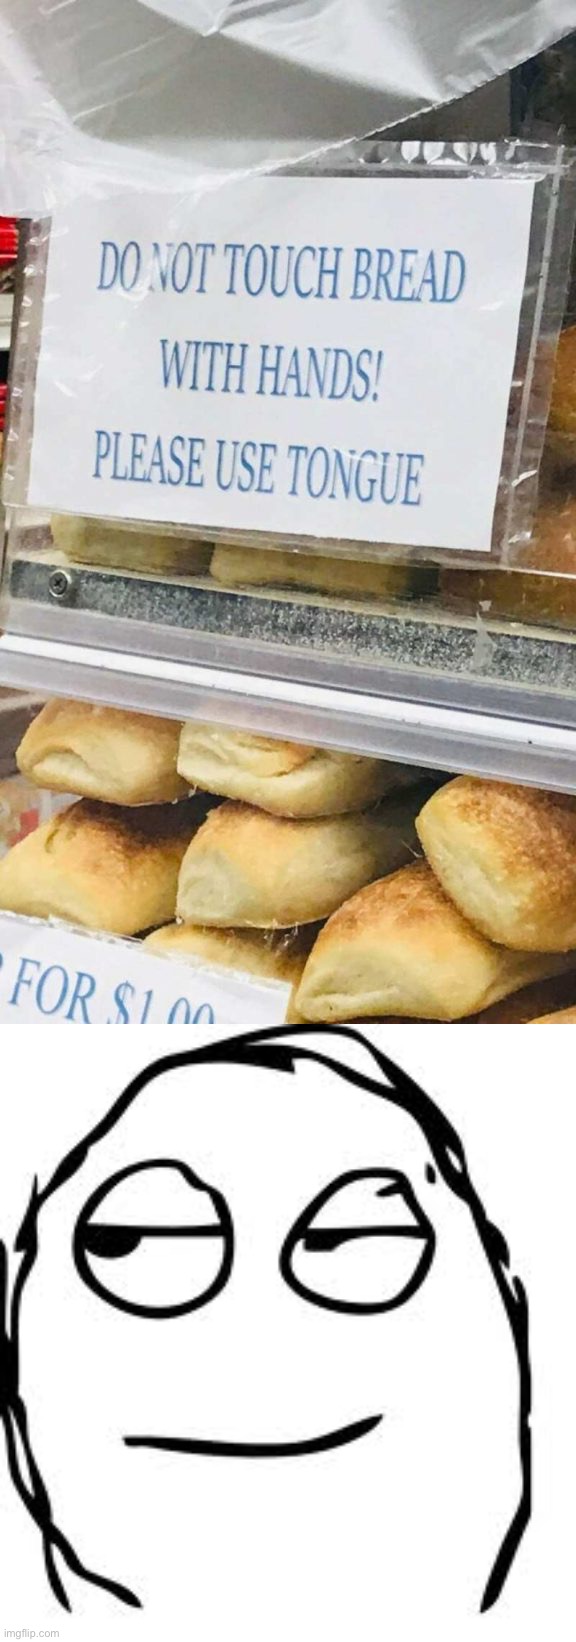 We know what’s about to happen | image tagged in memes,smirk rage face,funny,bread,lmao,oop | made w/ Imgflip meme maker